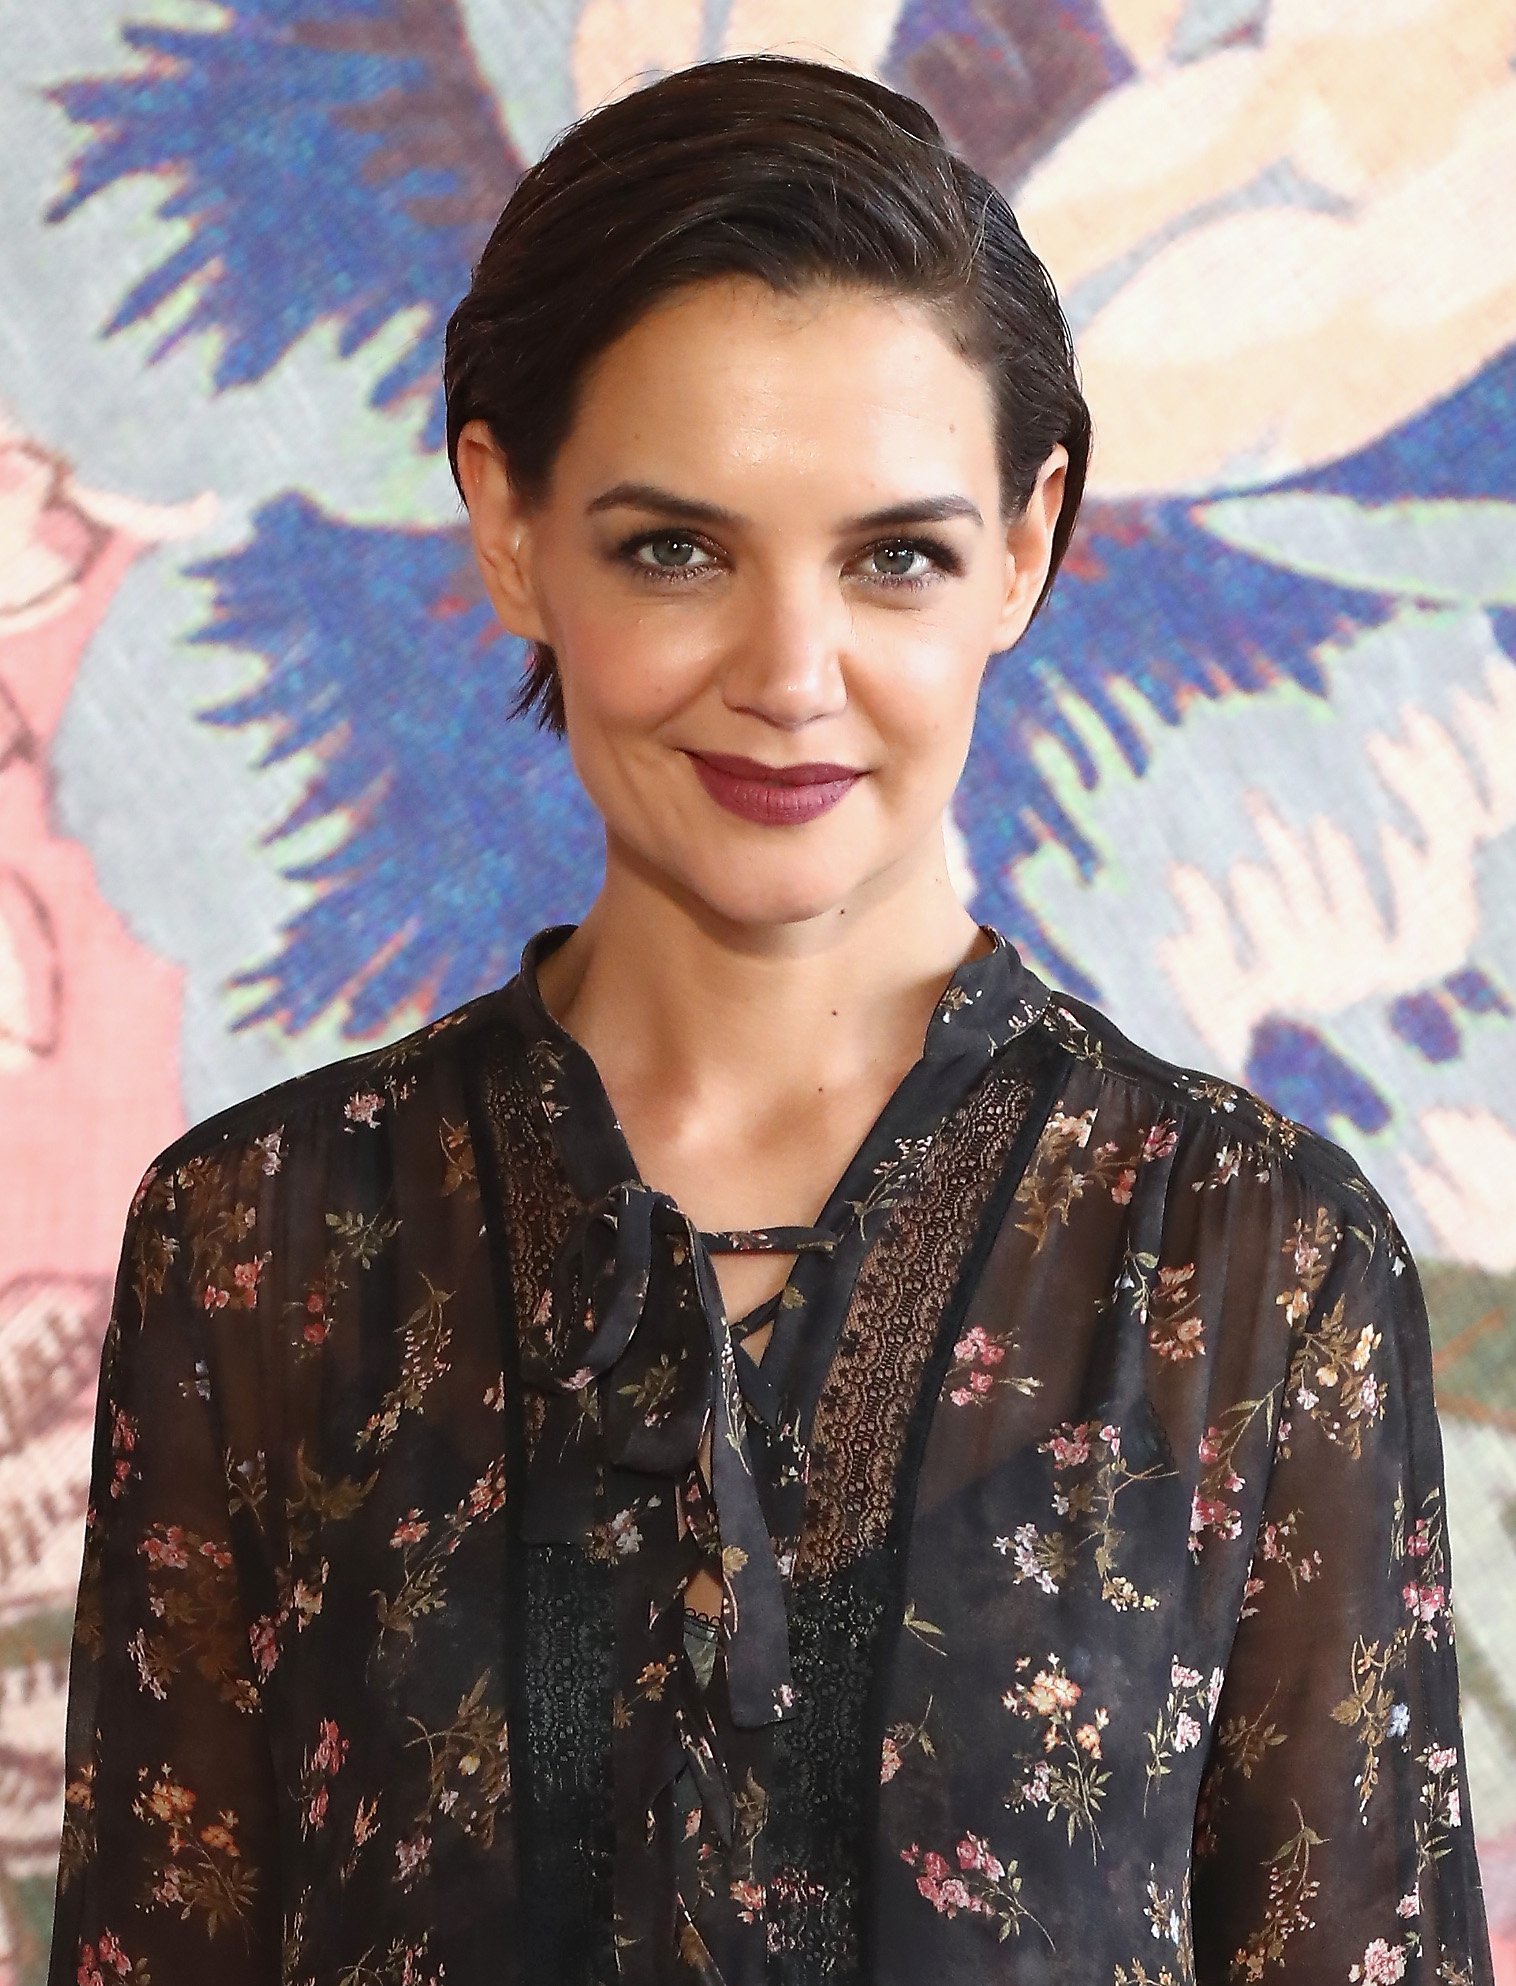  Katie Holmes attends the Zimmermann fashion show during New York Fashion Week on February 12, 2018, in New York City. | Source: Getty Images.